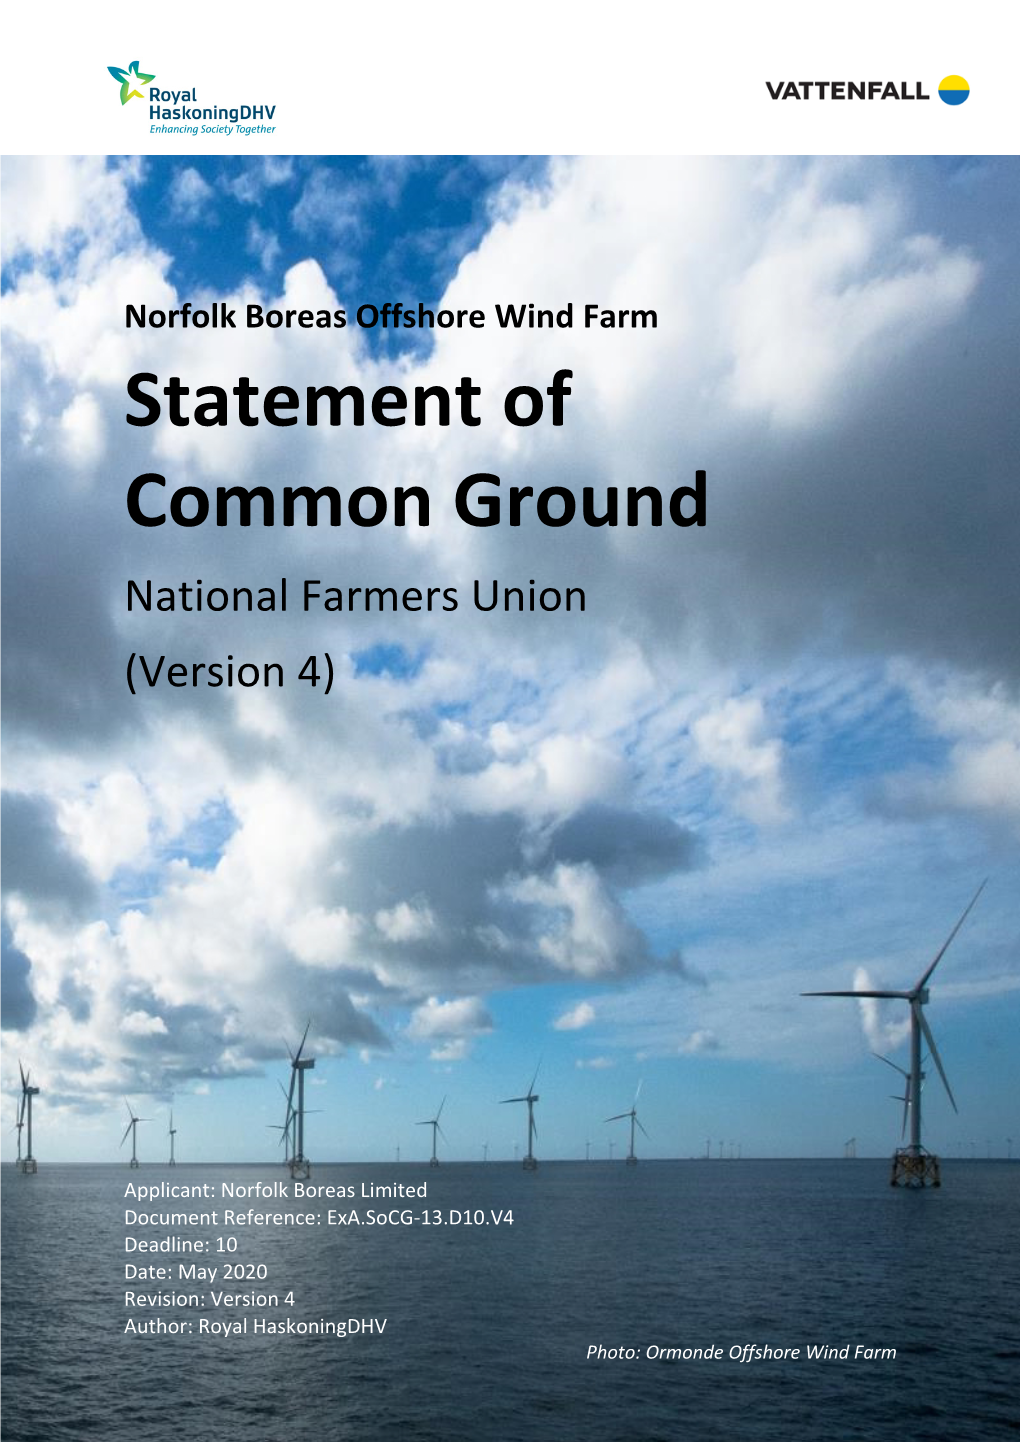 Norfolk Boreas Offshore Wind Farm Statement of Common Ground National Farmers Union (Version 4)